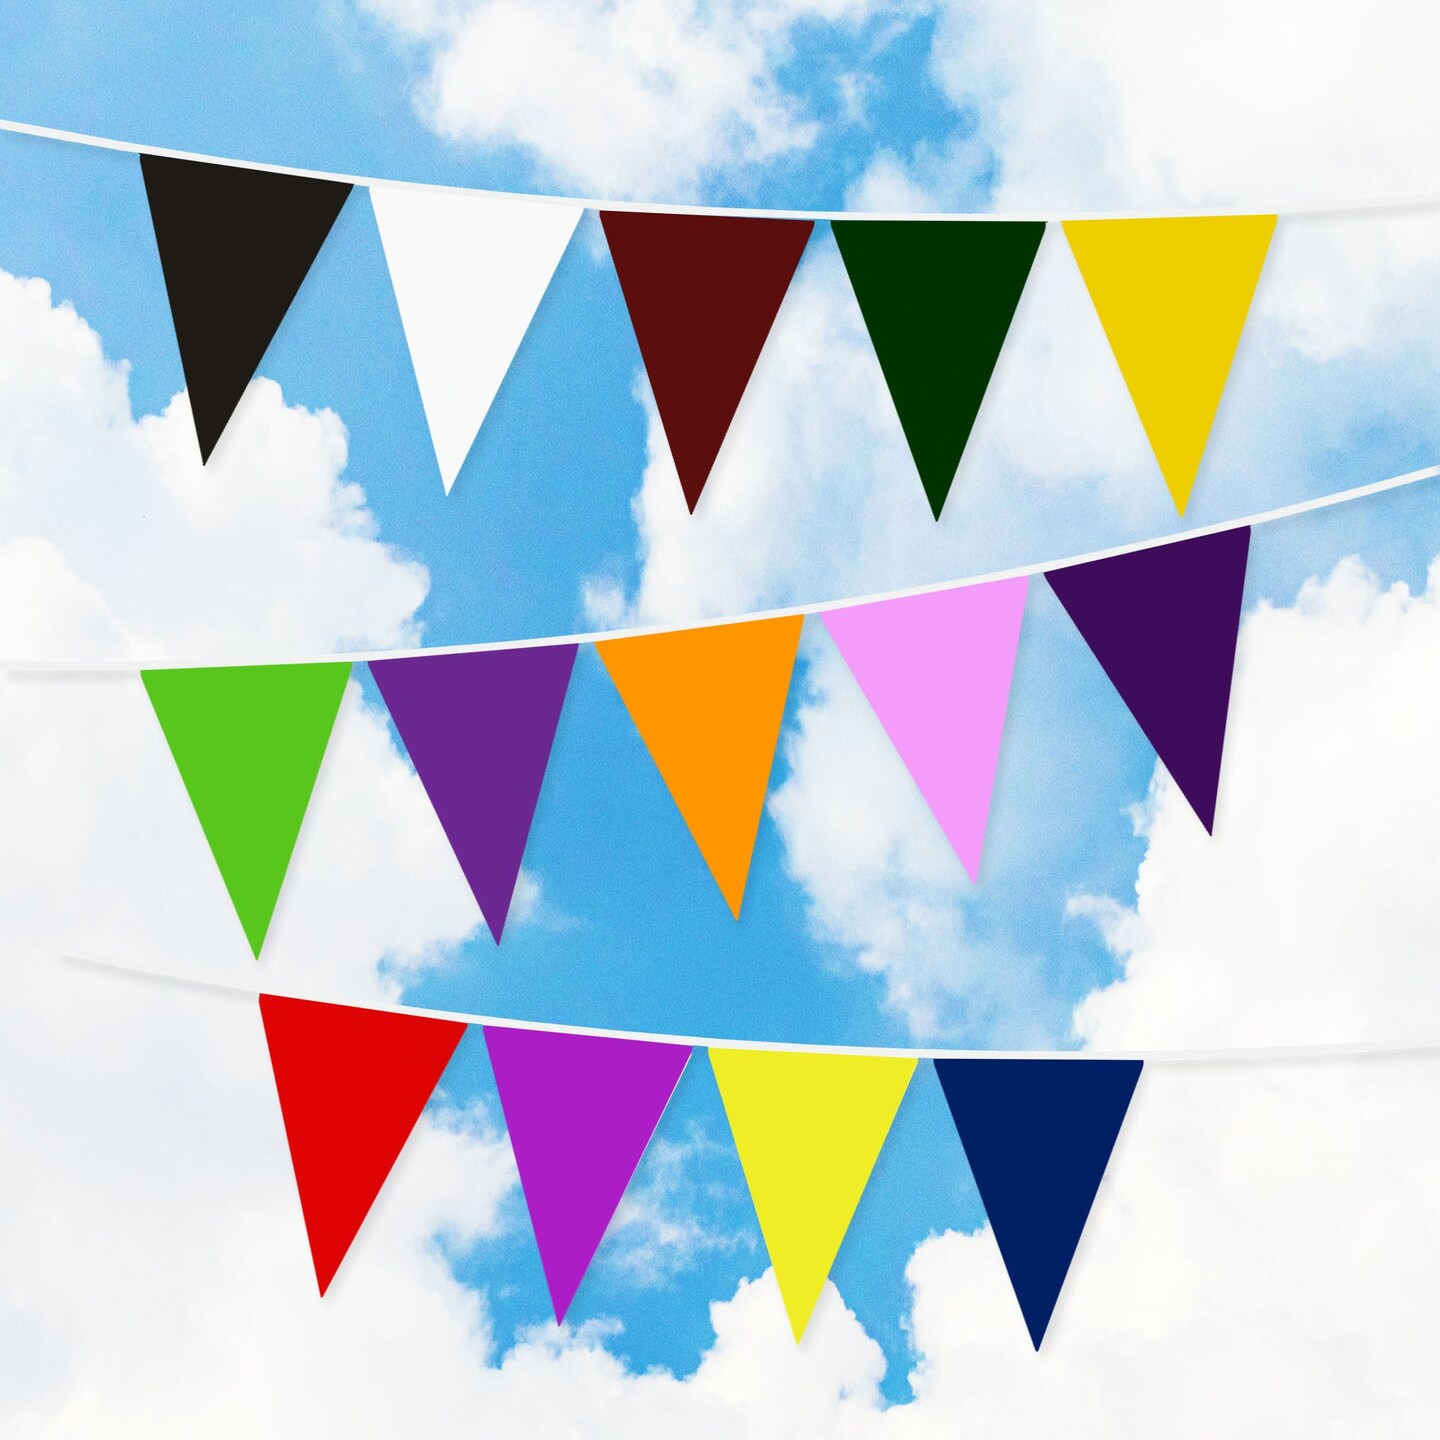 G128 Multicolor Pennant Bunting Banner | Flag 7.87 x 11.81 Inch, Full String 30.5 Feet | Printed 150D Polyester, Decorations For Bar, School, Festival Events Celebration